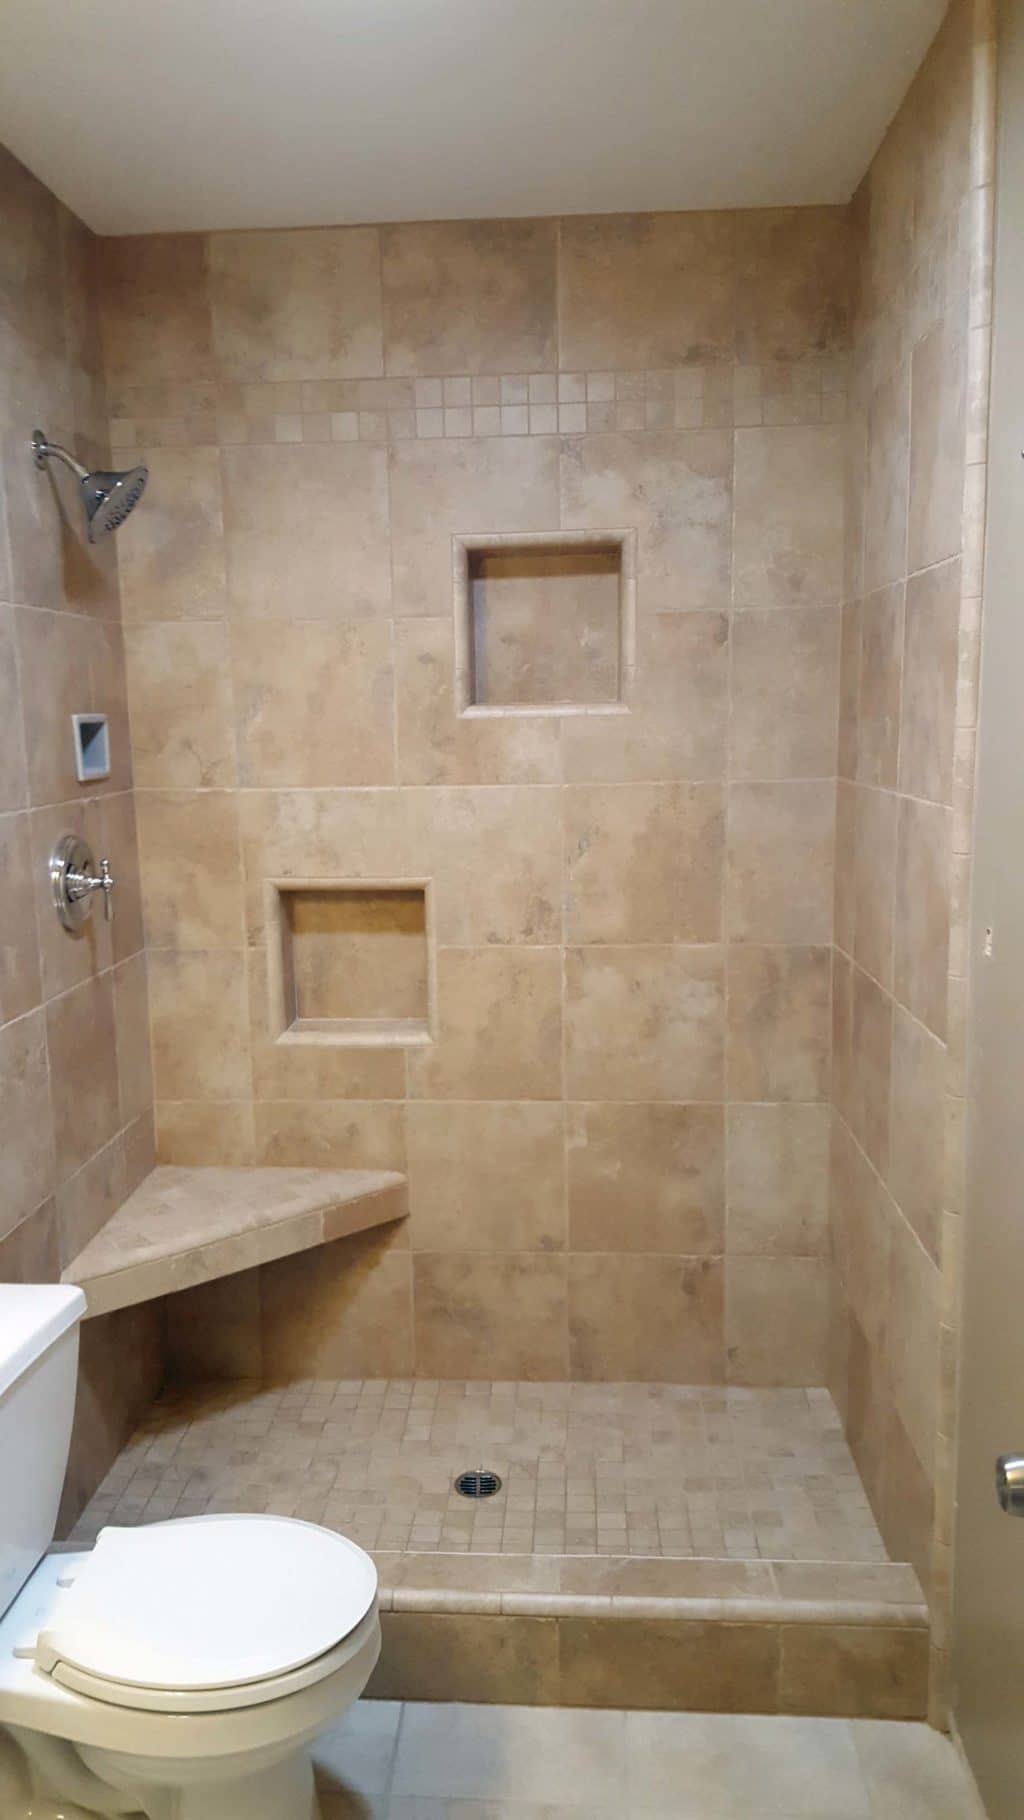 Tile Shower With Corner Bench Seat